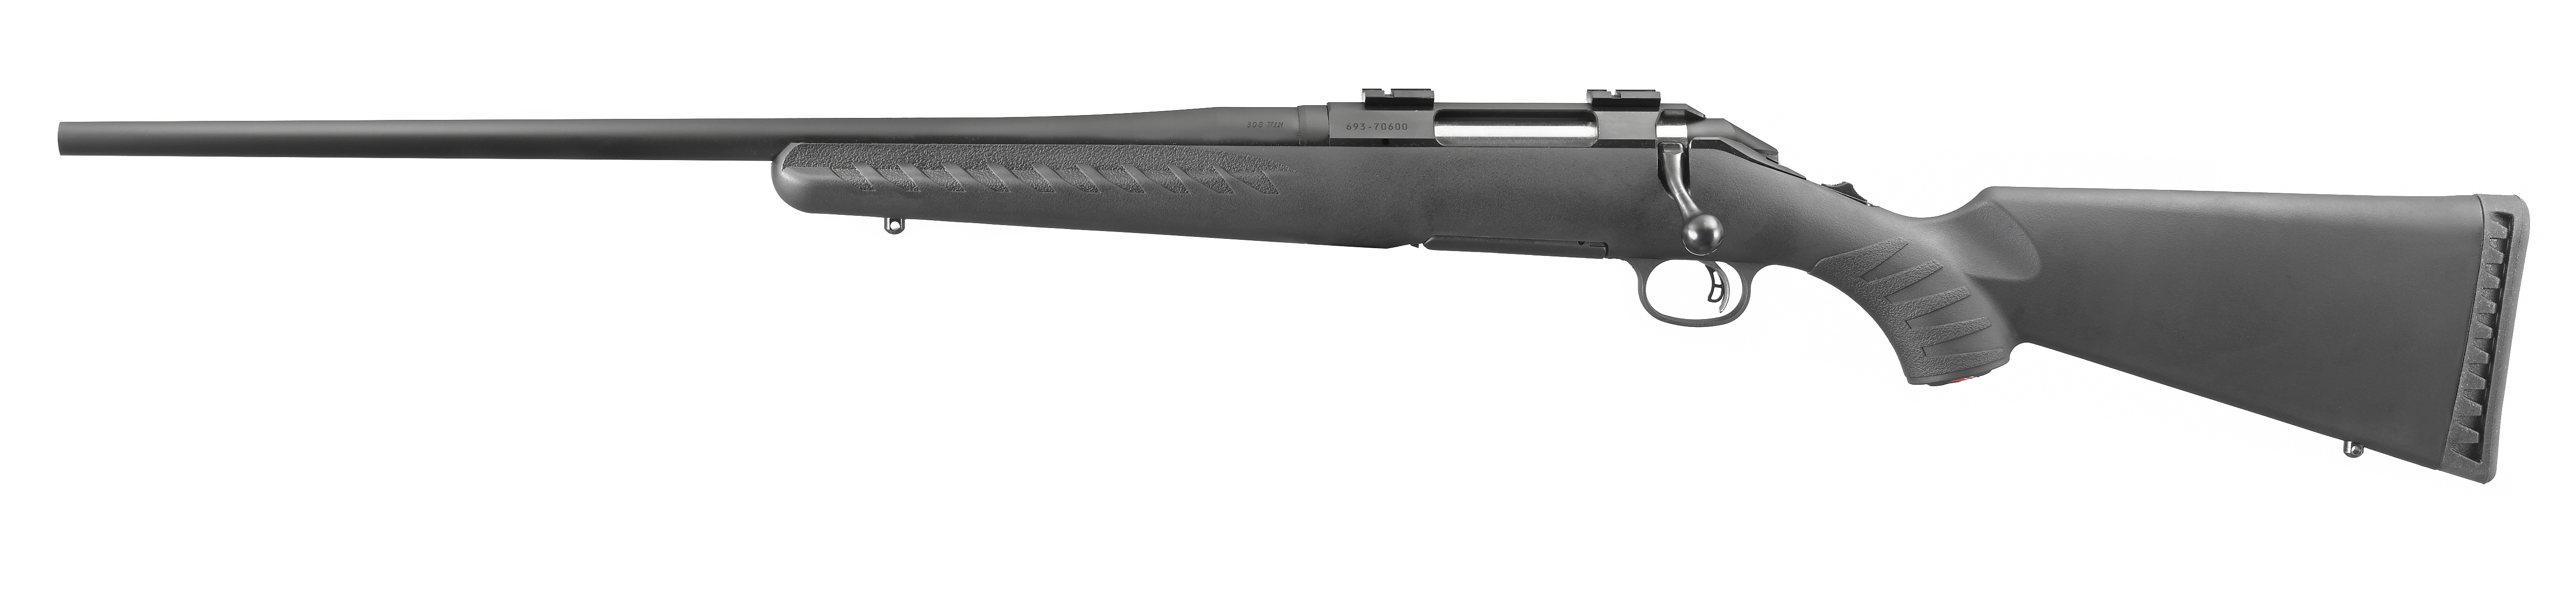 Ruger LH American and Short Barreled Ranch Rifles